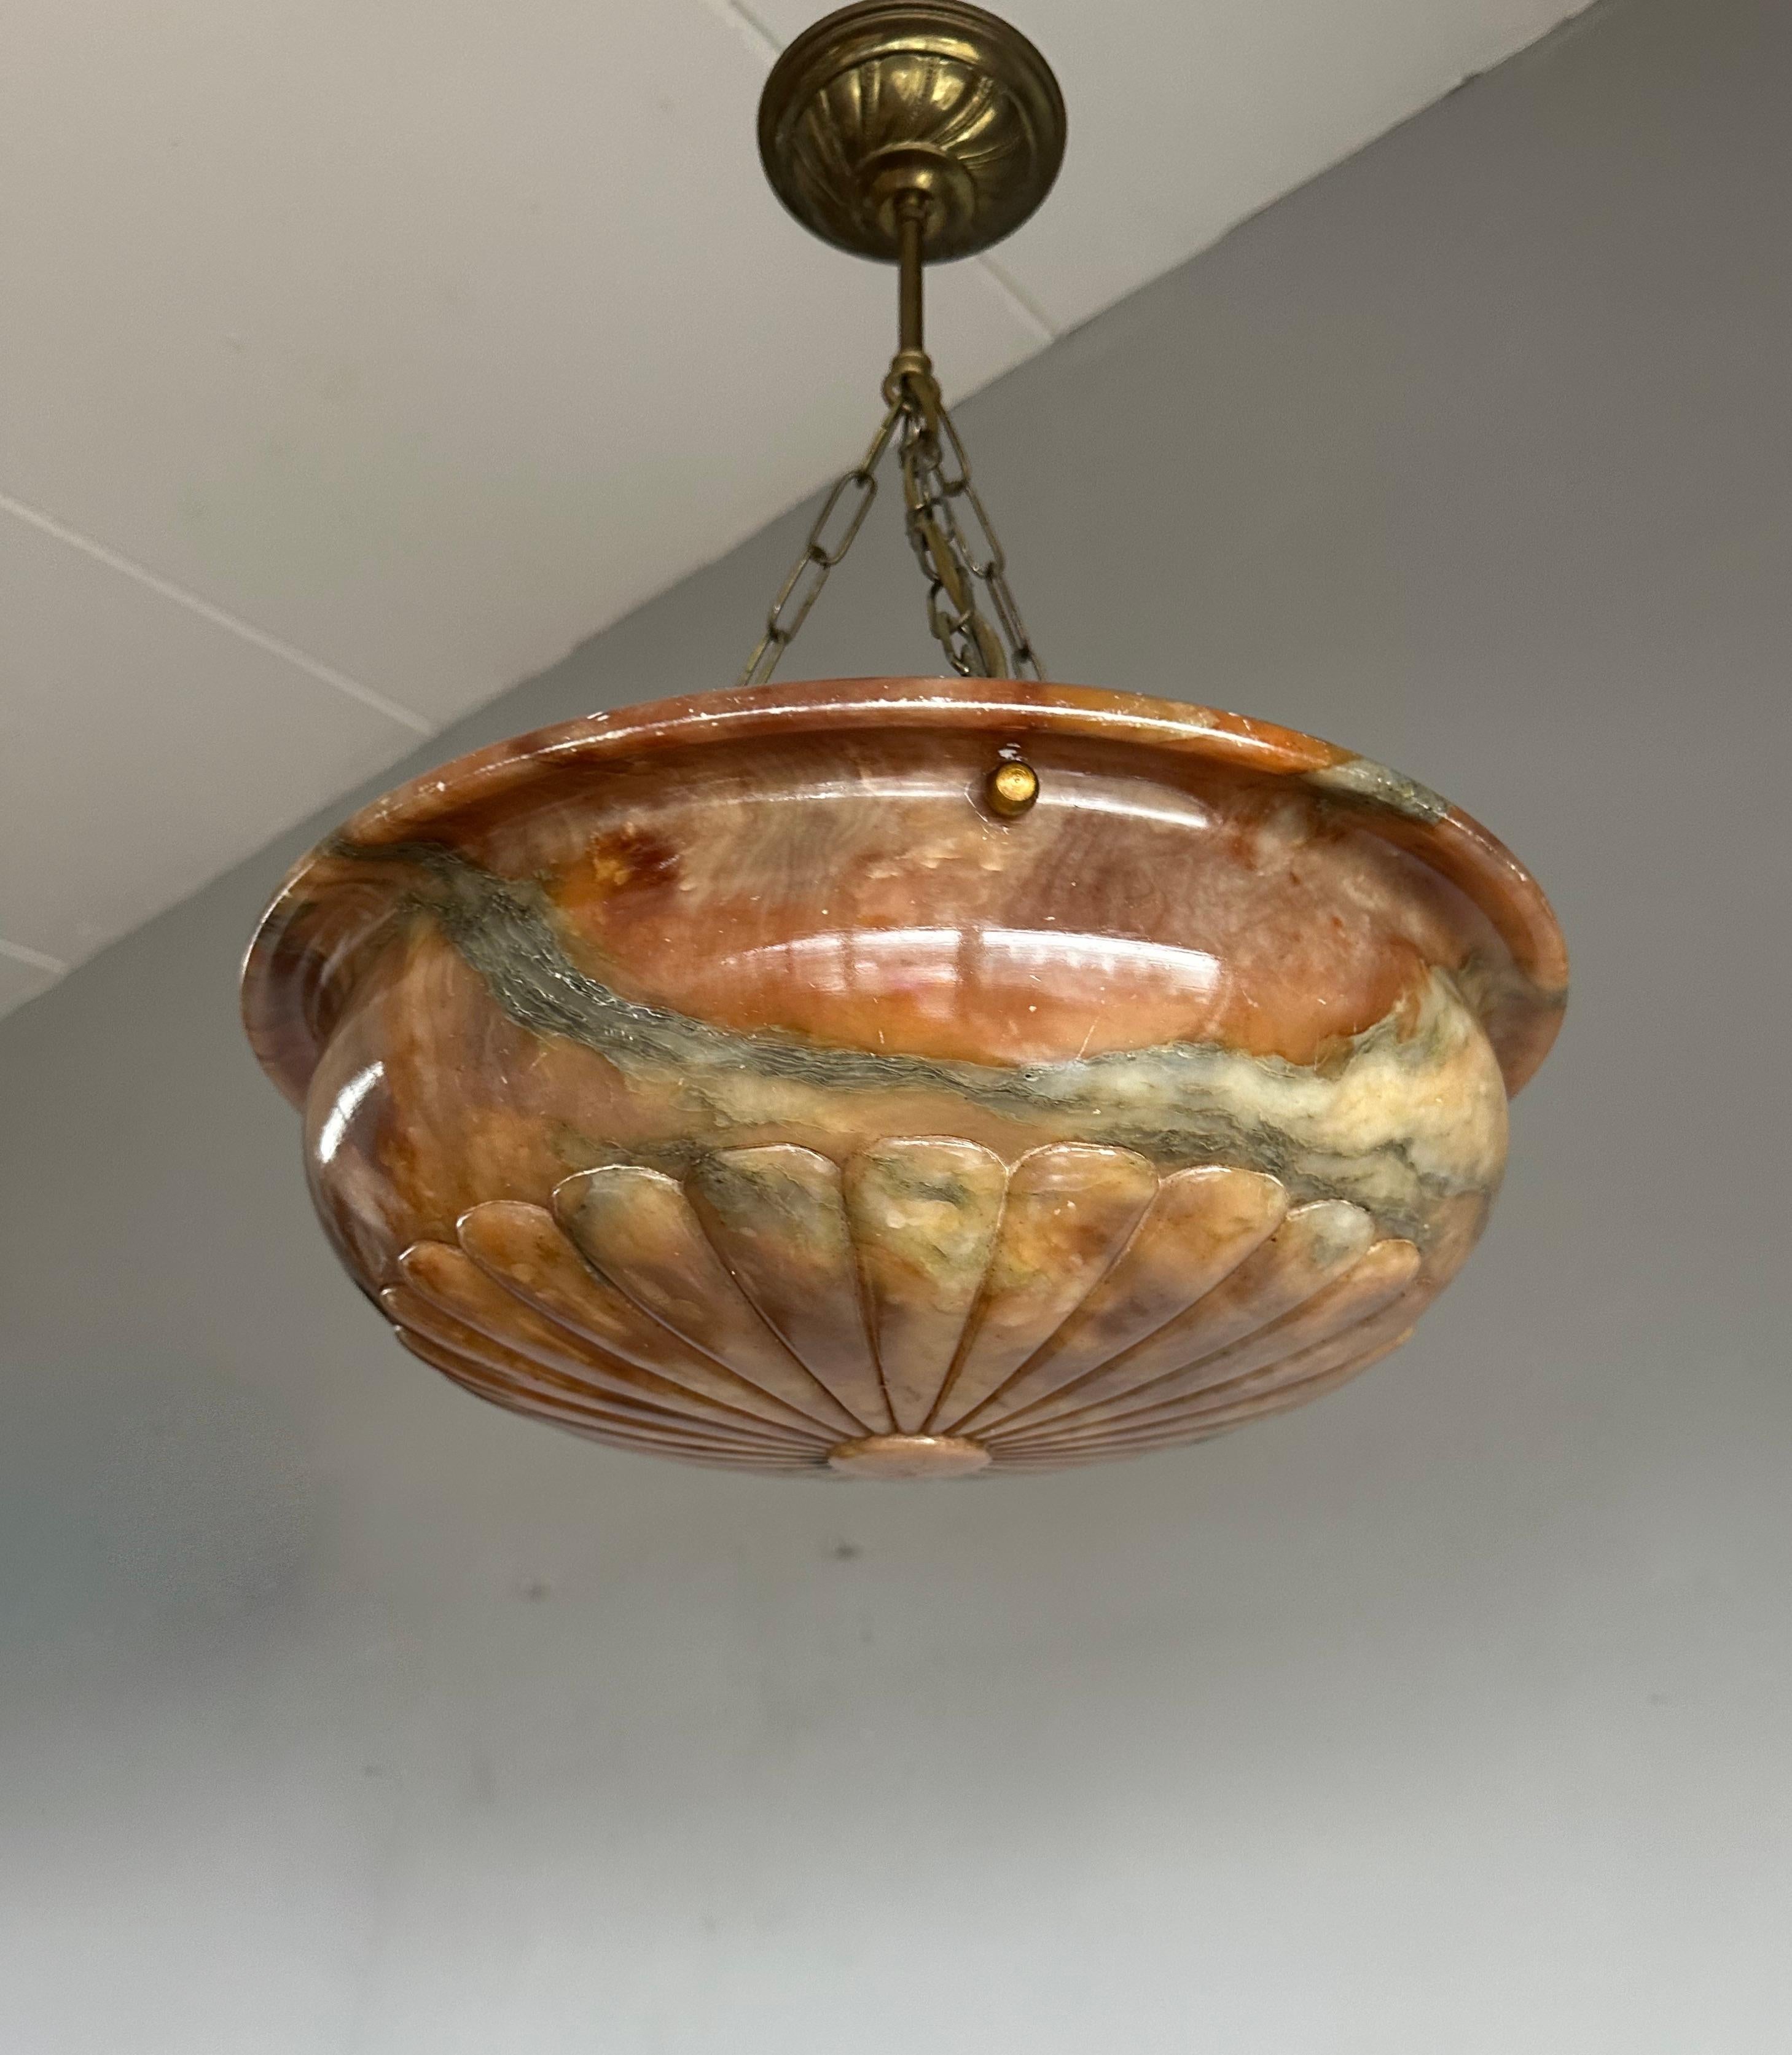 Perfectly Design Antique Alabaster Chandelier / Pendant Light in Mint Condition For Sale 5